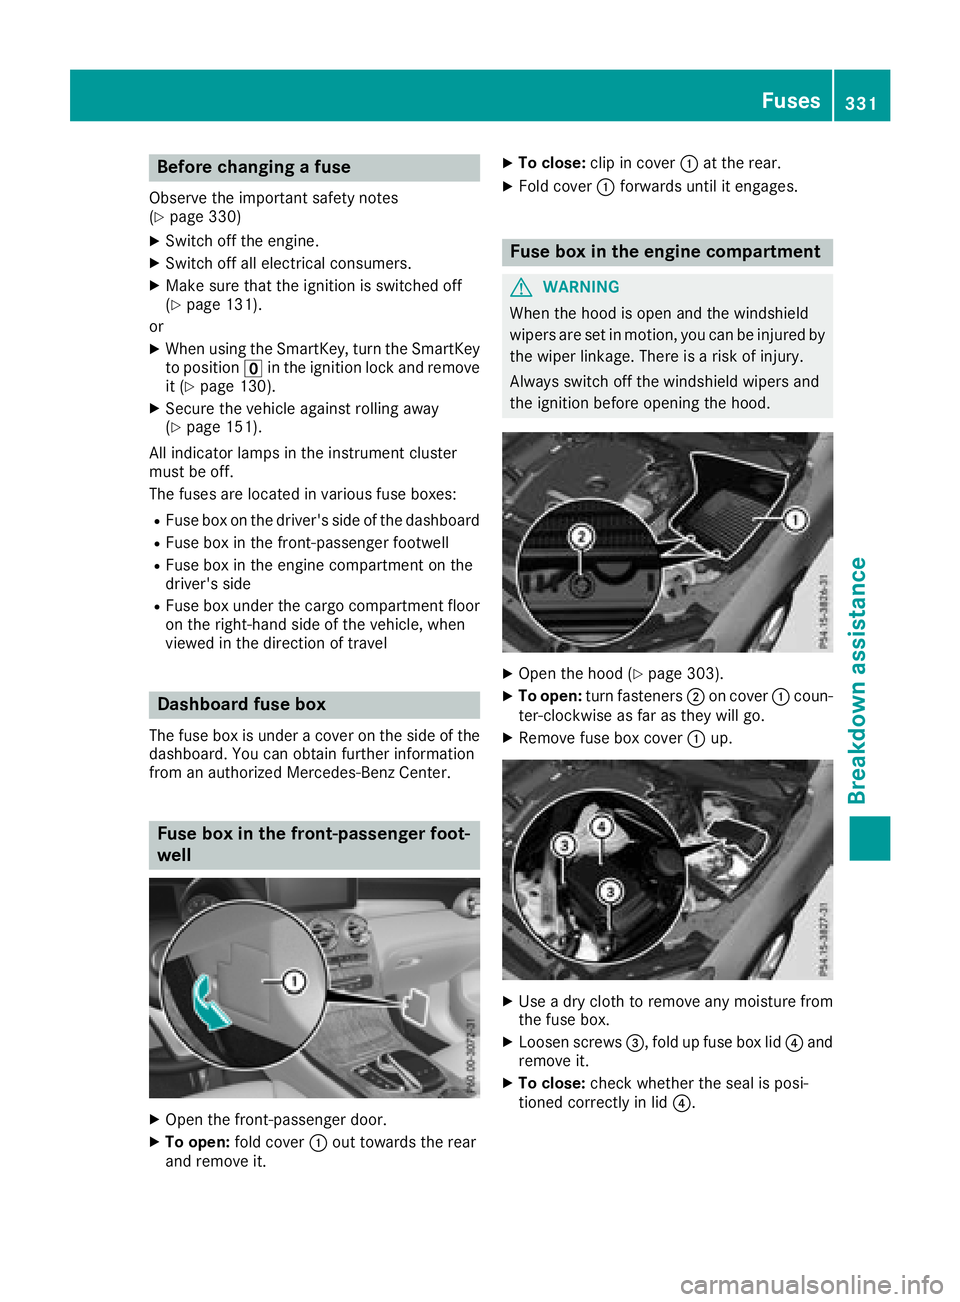 MERCEDES-BENZ GLC COUPE 2018  Owners Manual Before changing a fuse
Observe the important safety notes
(Ypage 330)
XSwitch off the engine.
XSwitch off all electrical consumers.
XMake sure that the ignition is switched off
(Ypage 131).
or
XWhen u